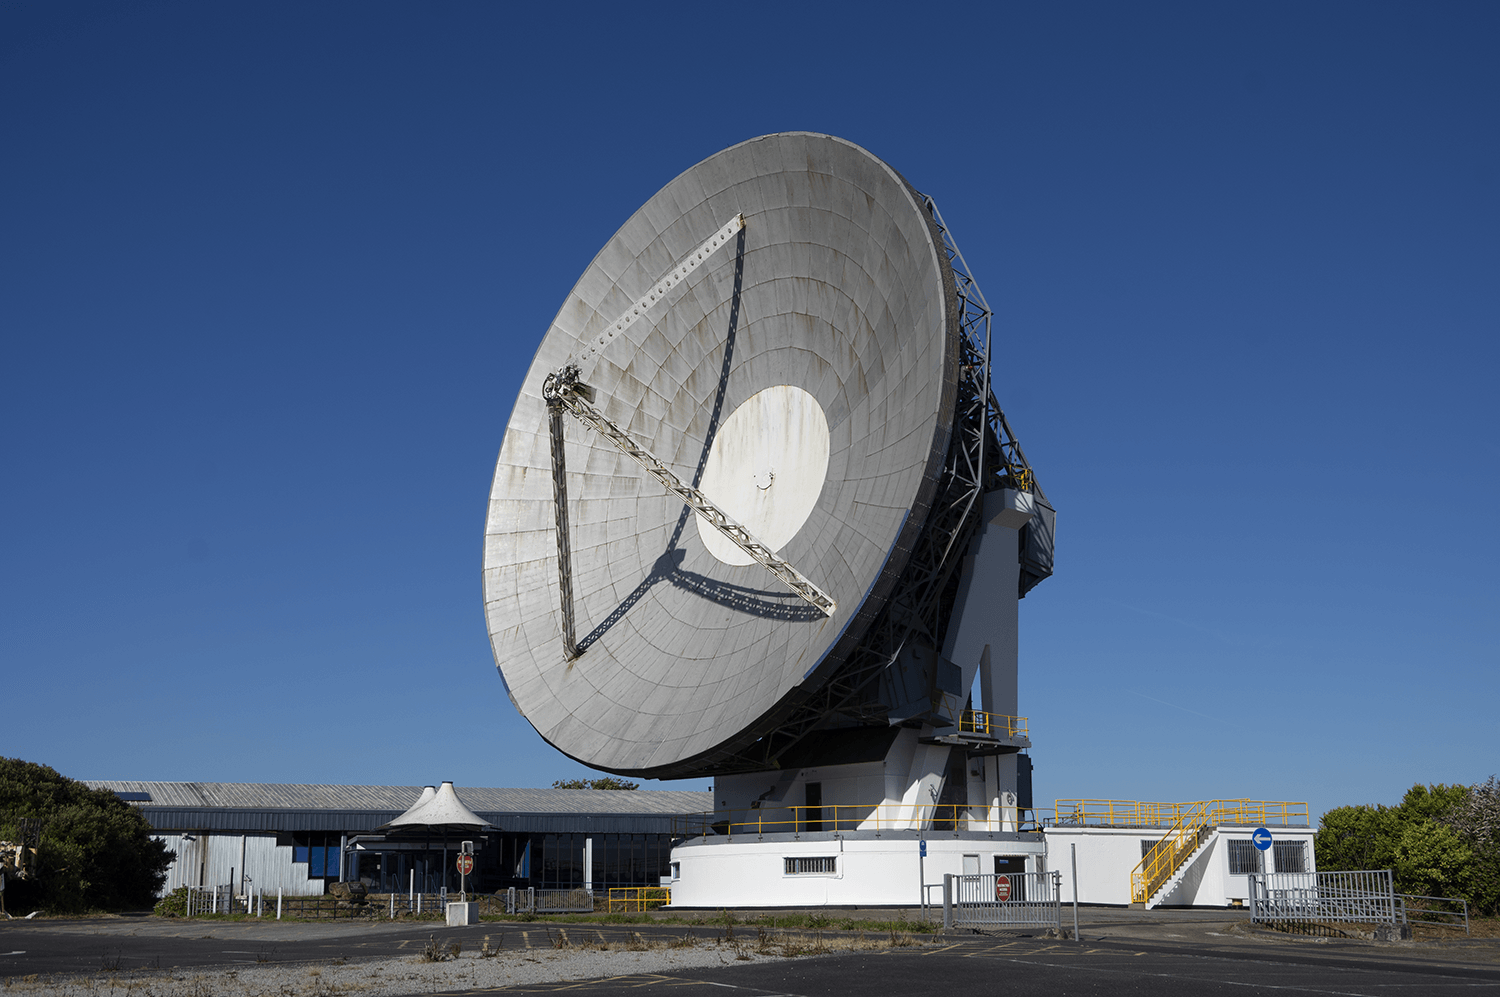 Antenna 1 at Goonhilly